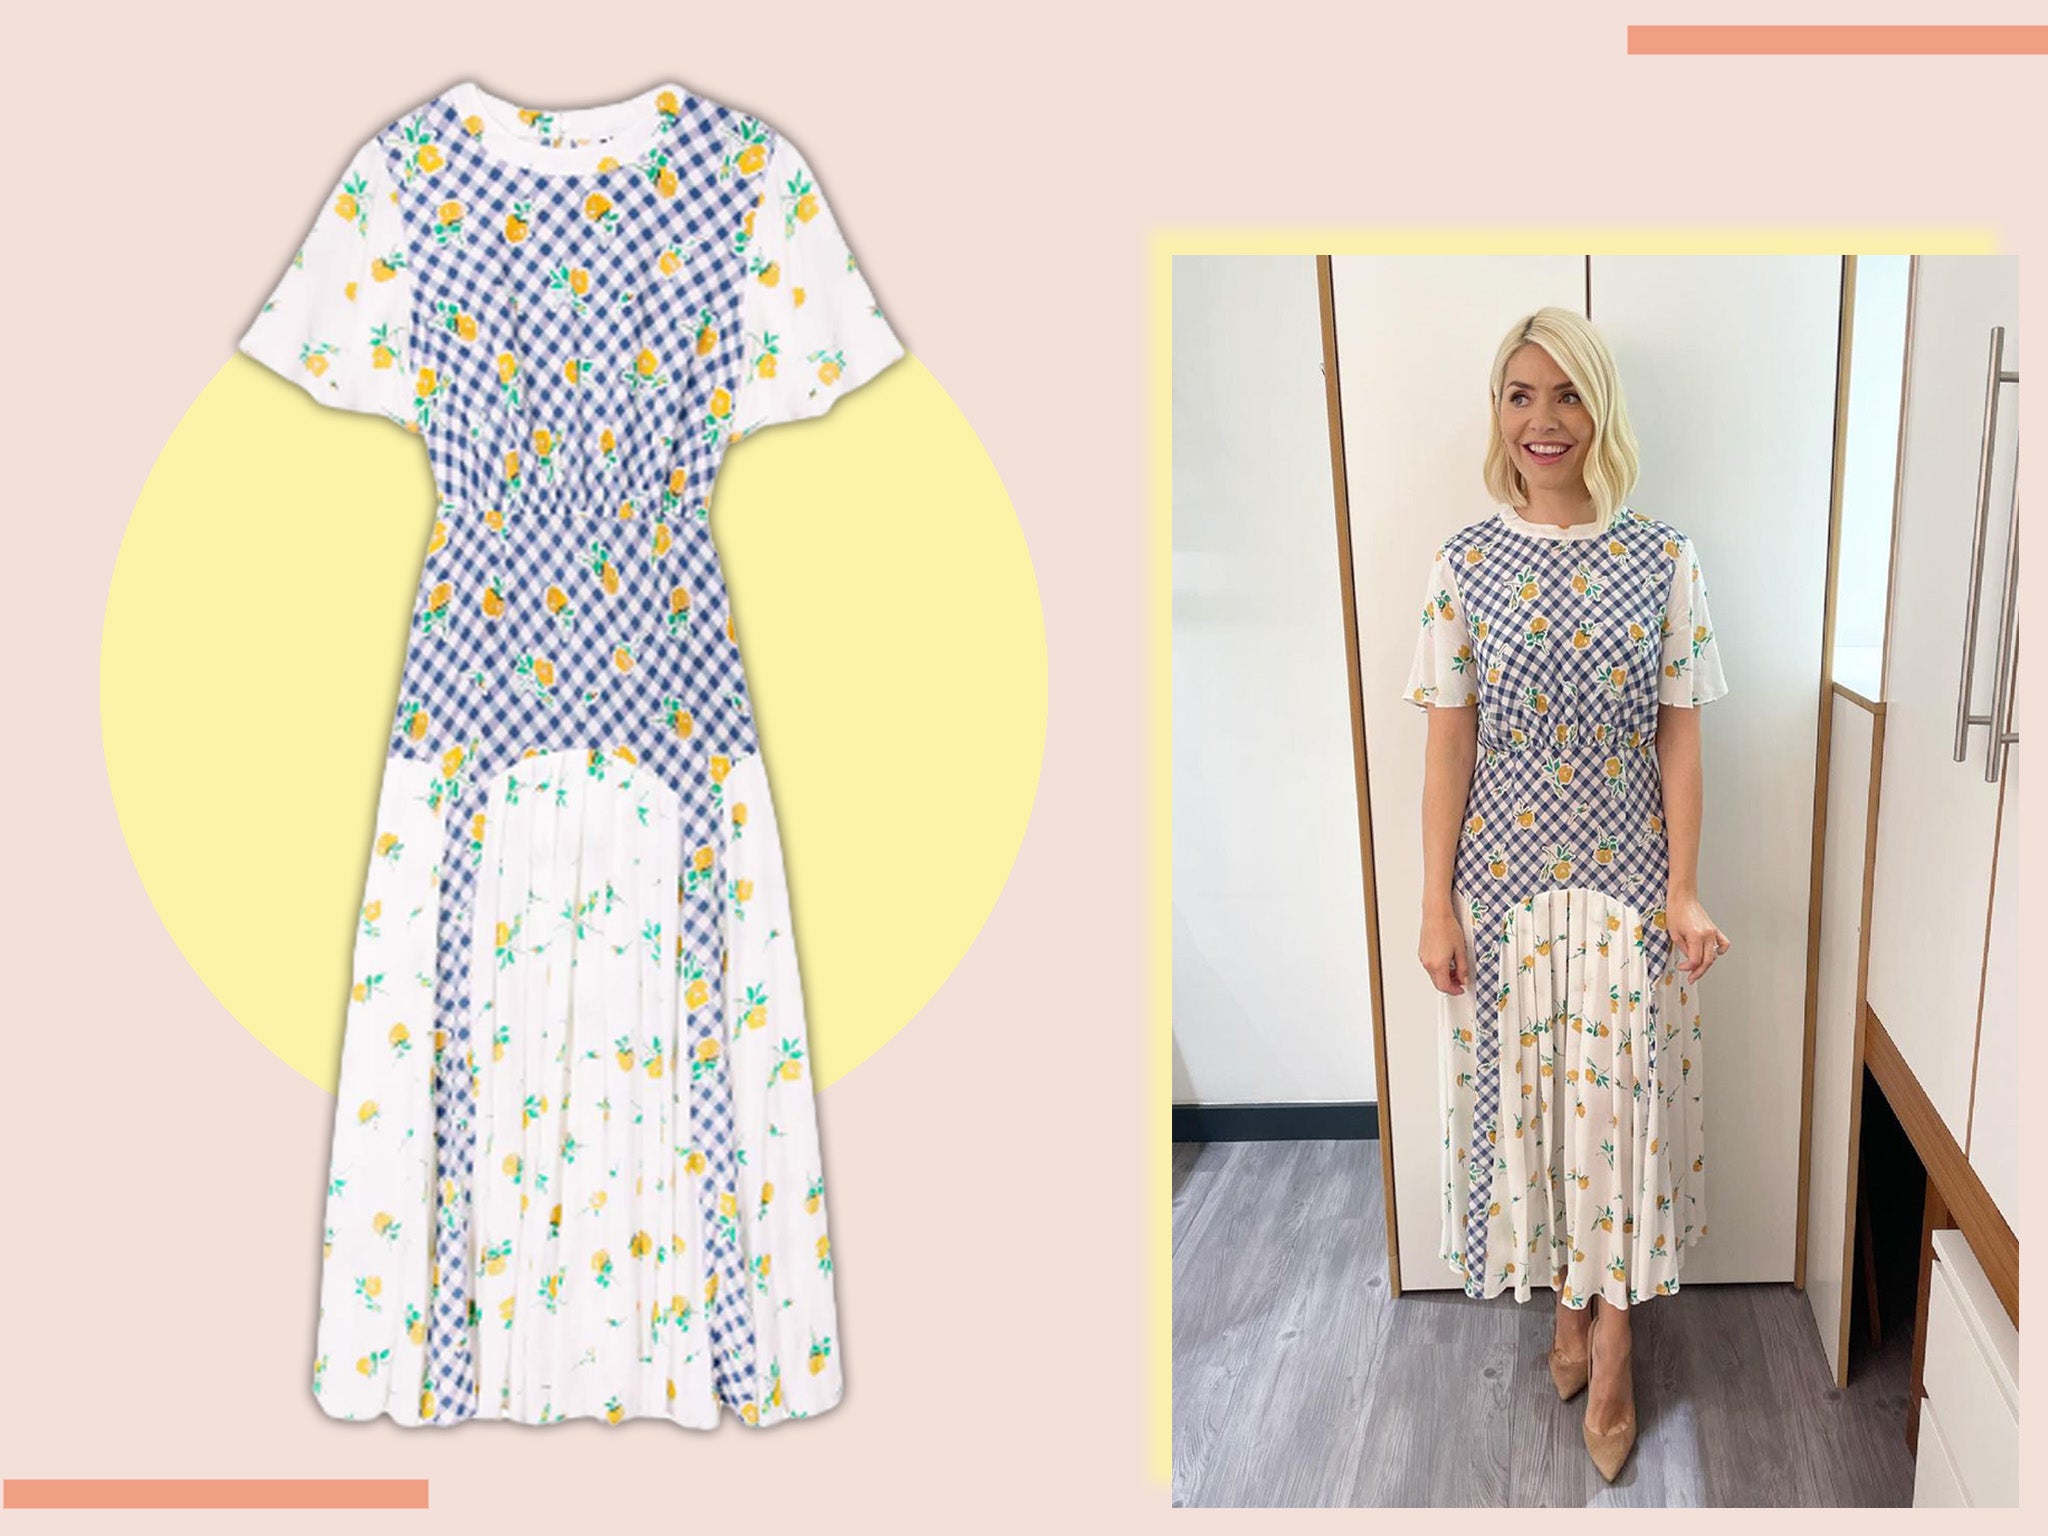 Take inspiration from Holly’s wardrobe with this patchwork number